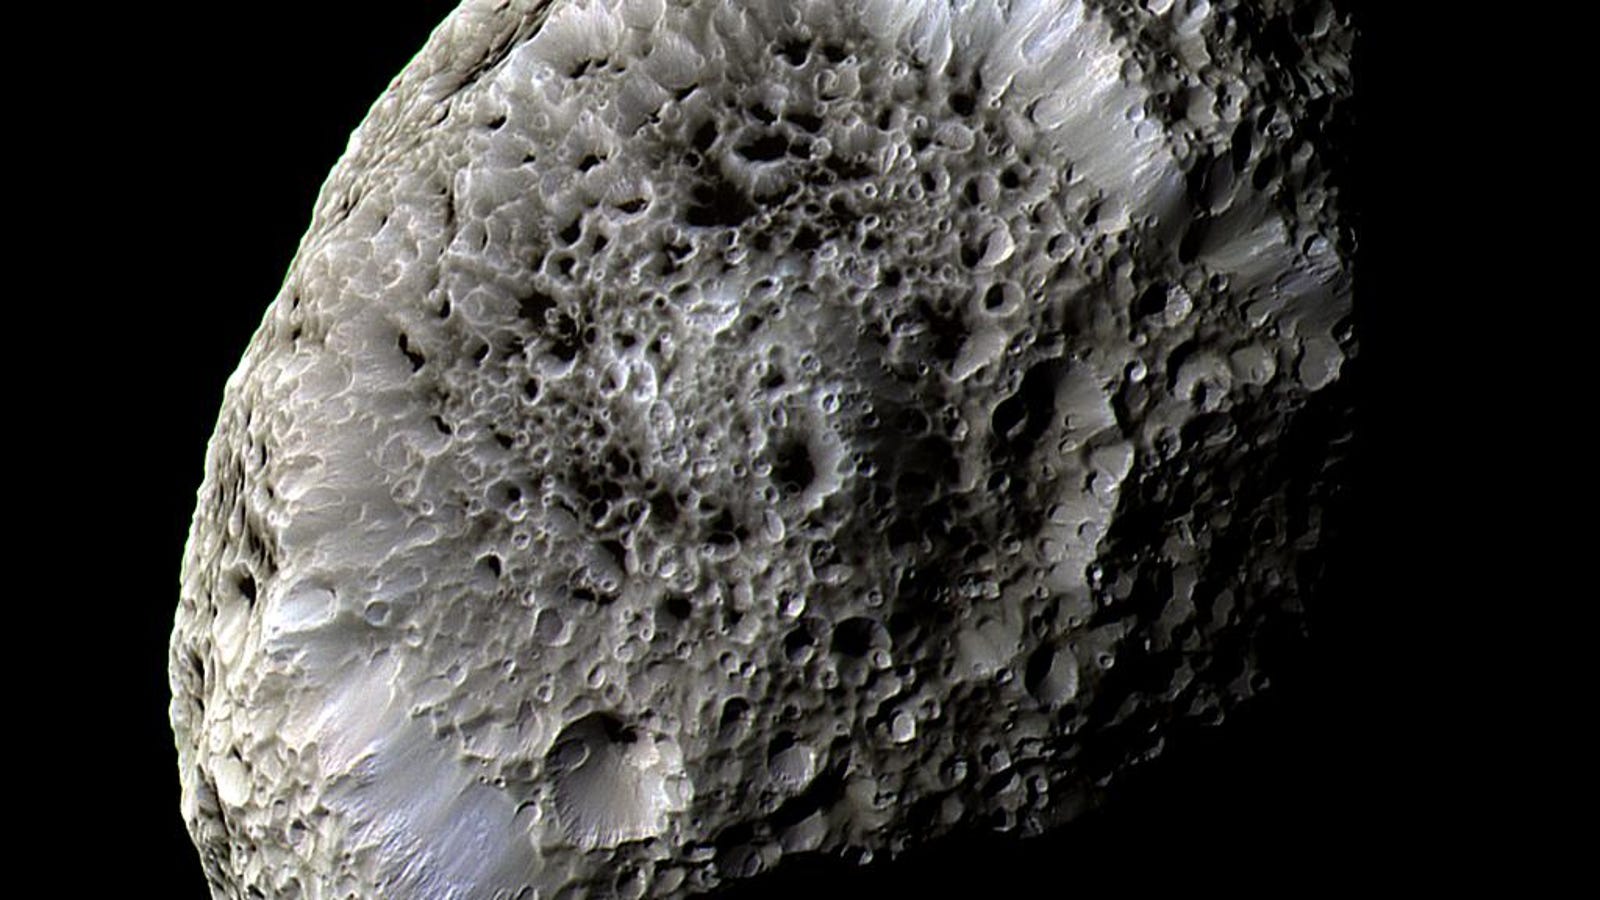 There S More To Hyperion S Weirdness Than Its Sponge Like Surface